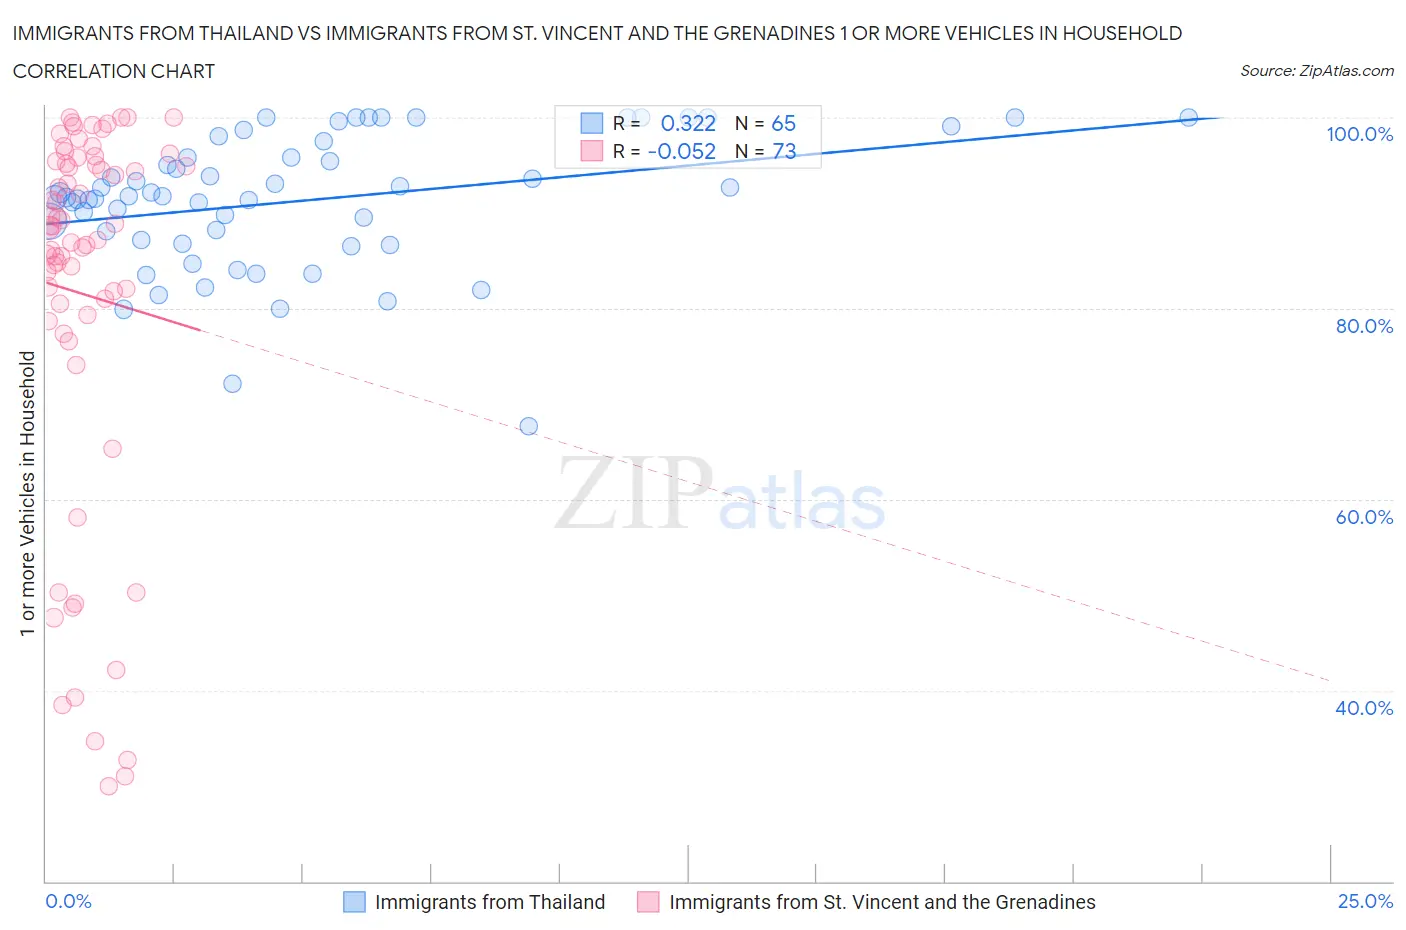 Immigrants from Thailand vs Immigrants from St. Vincent and the Grenadines 1 or more Vehicles in Household